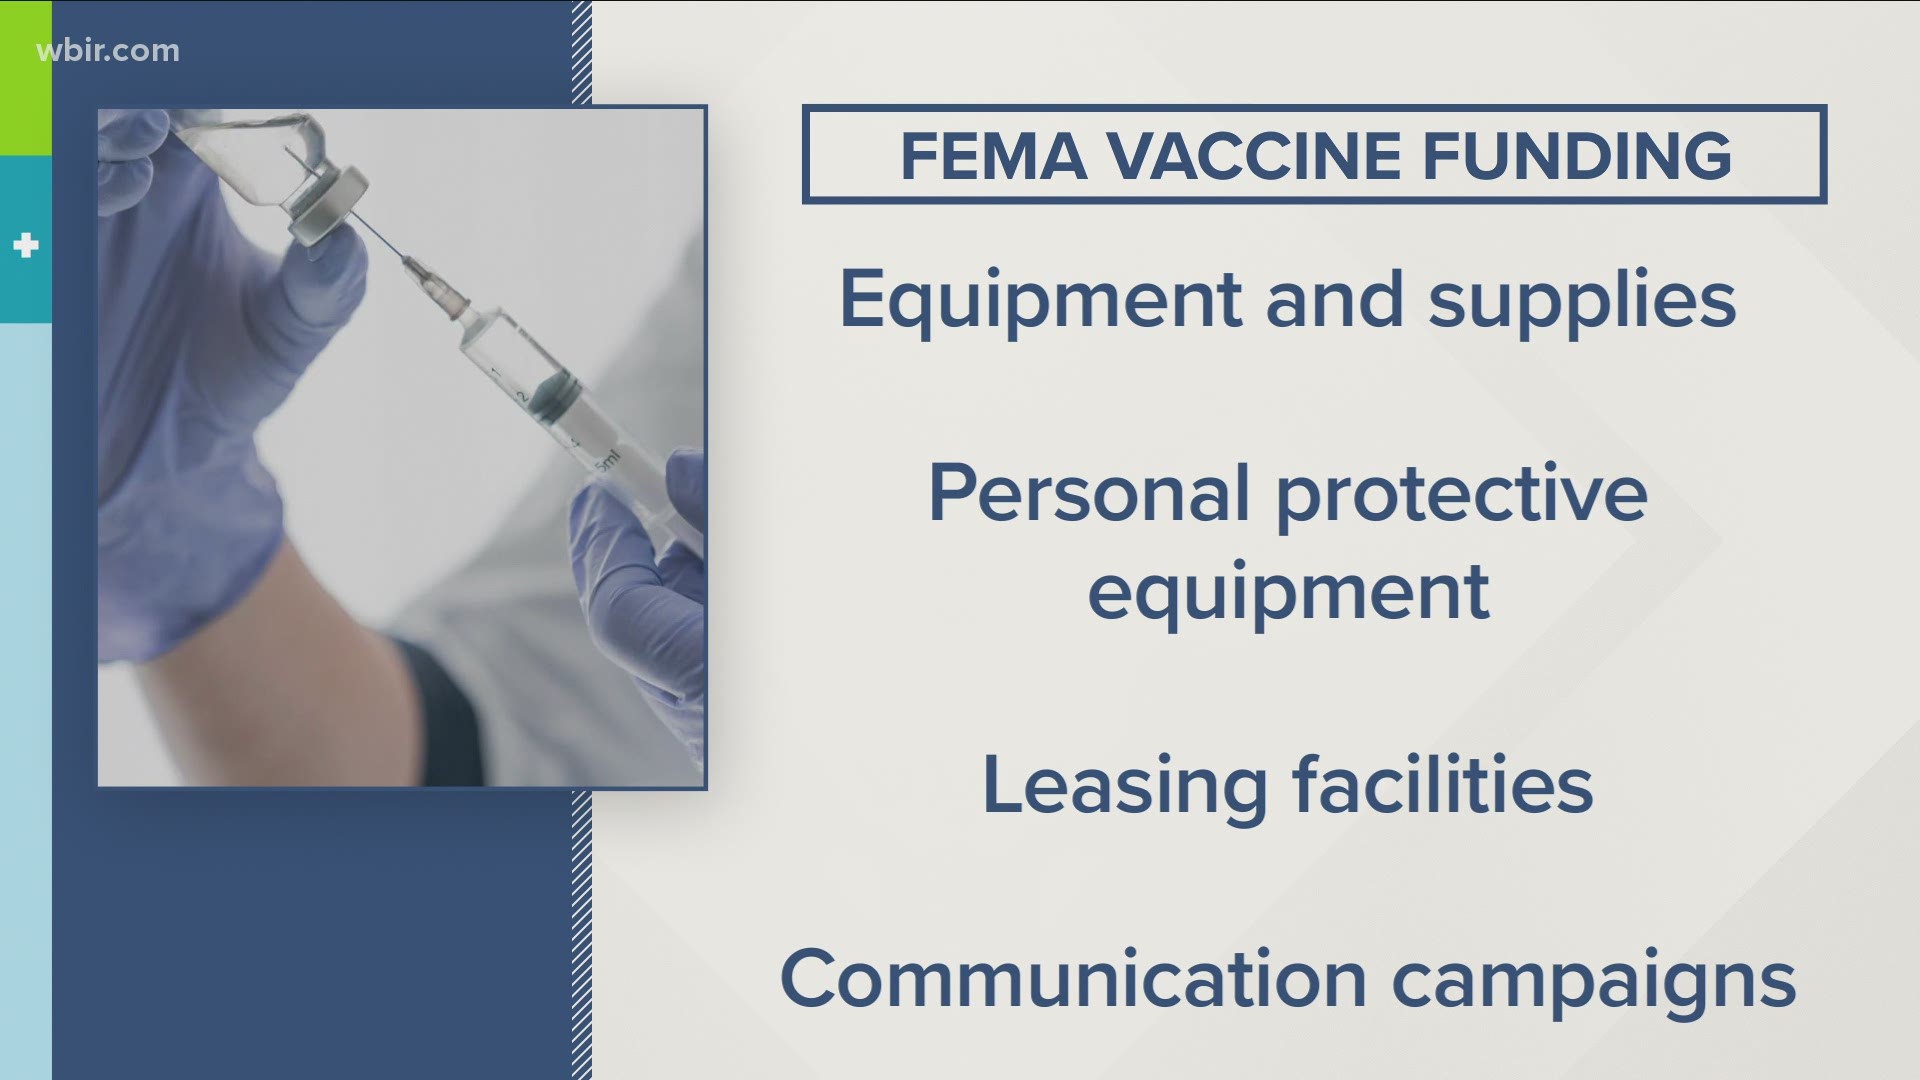 The federal emergency management agency says the state can use the money to pay for its vaccine program. That includes things like equipment and supplies.